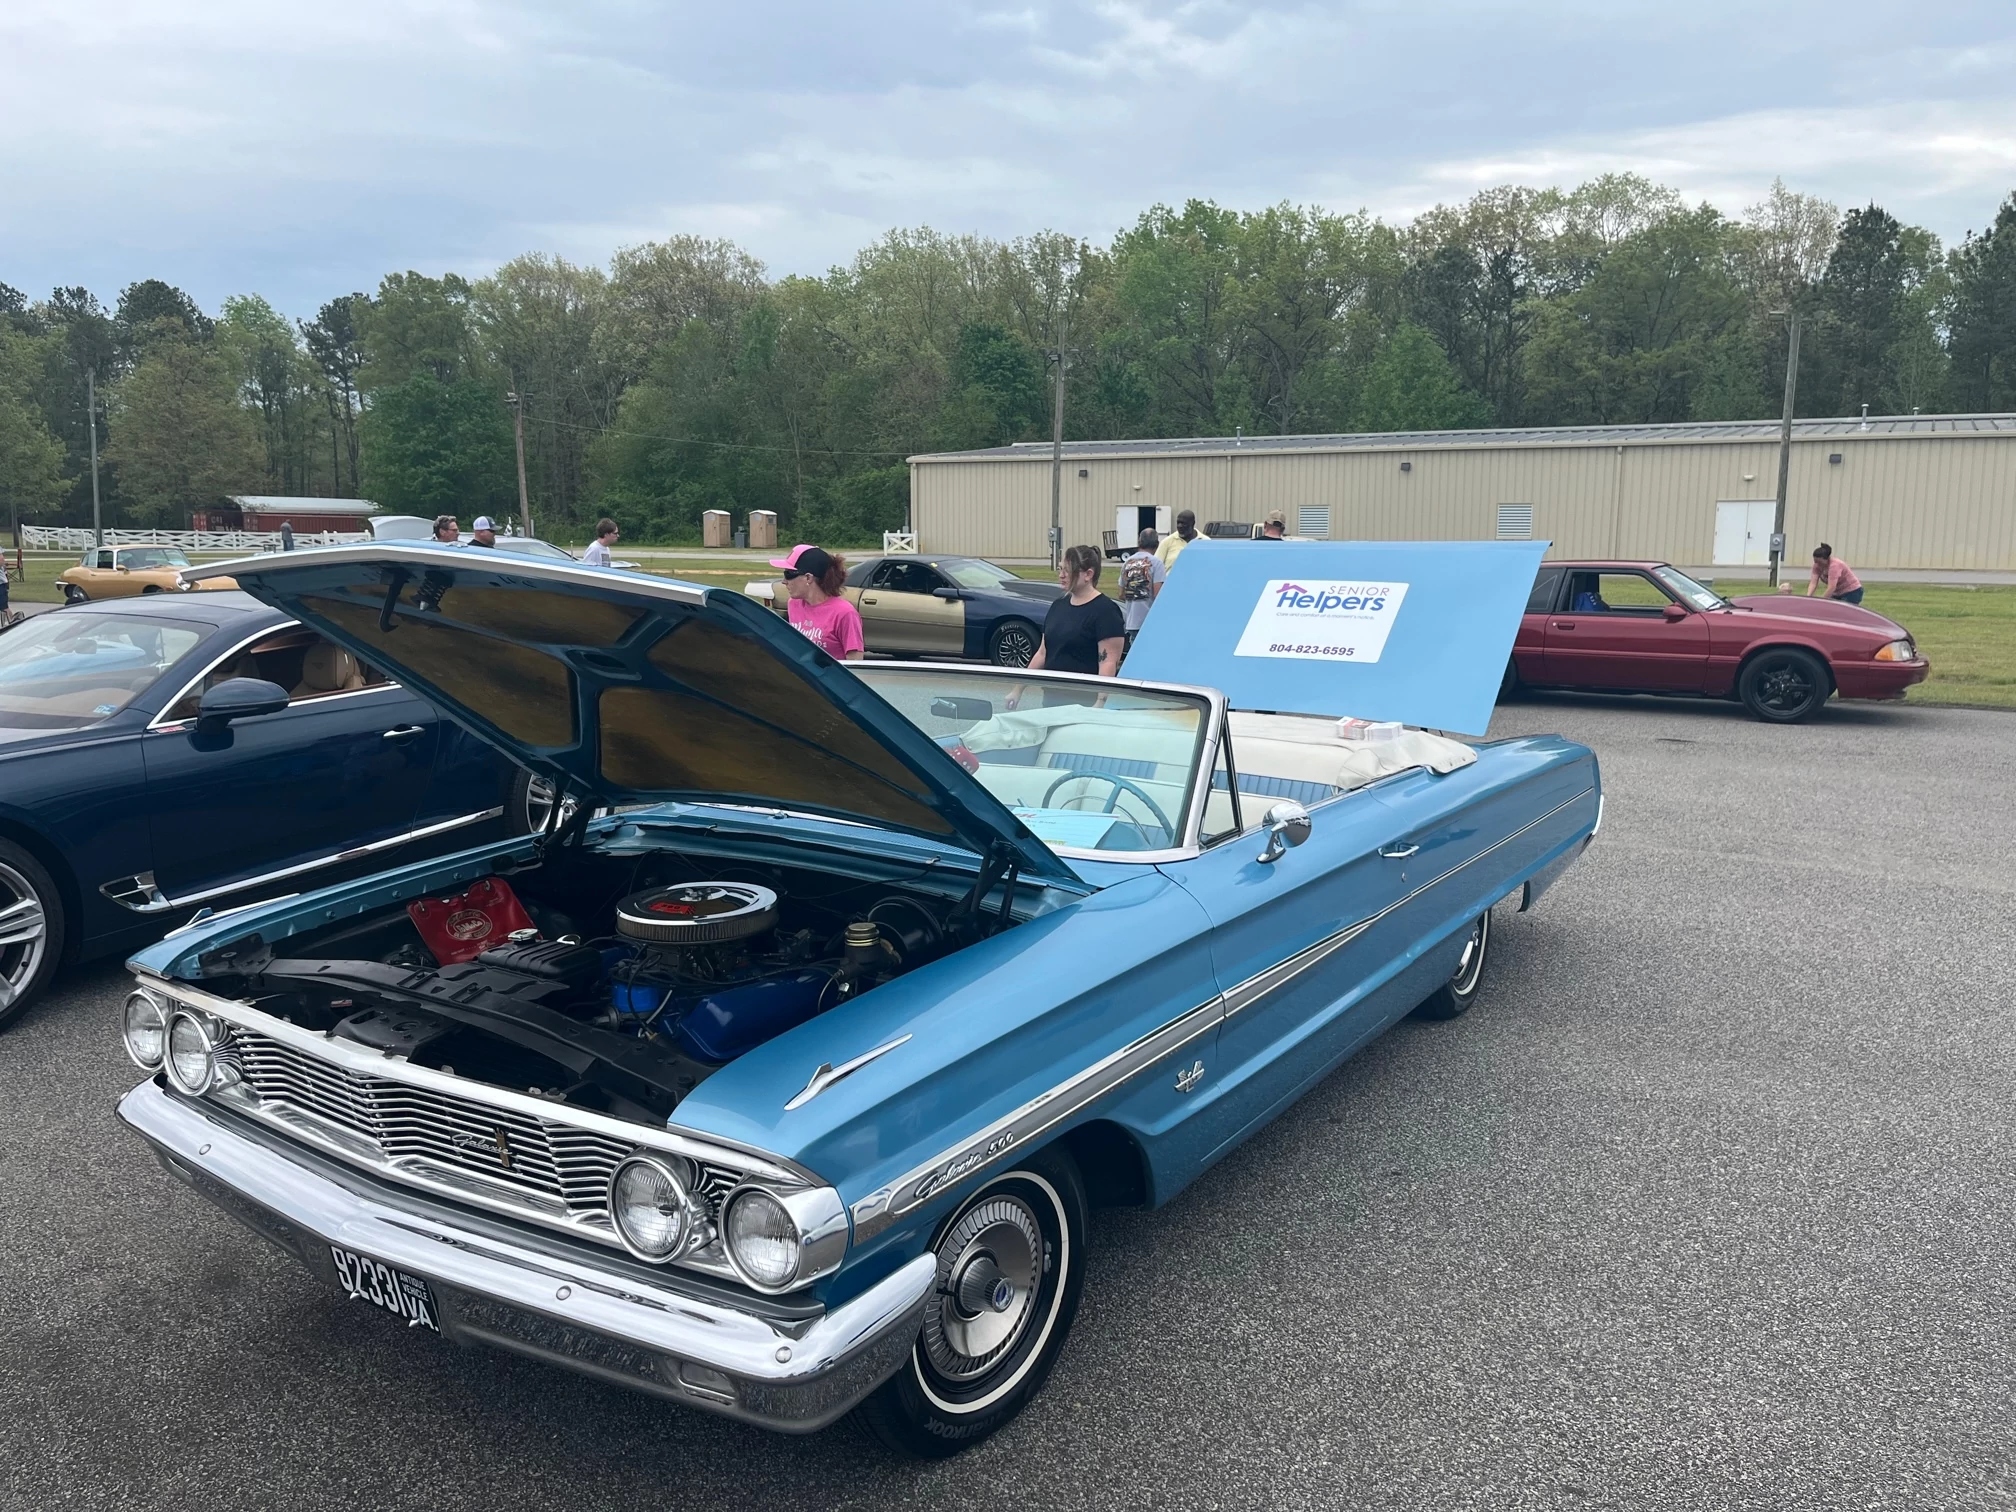 Senior Helpers participated in the River City Cruizers car show to benefit the Special Olympics on Sunday April 16, 2023. What a wonderful day with over 80 cars at the Chesterfield County Fair Grounds.